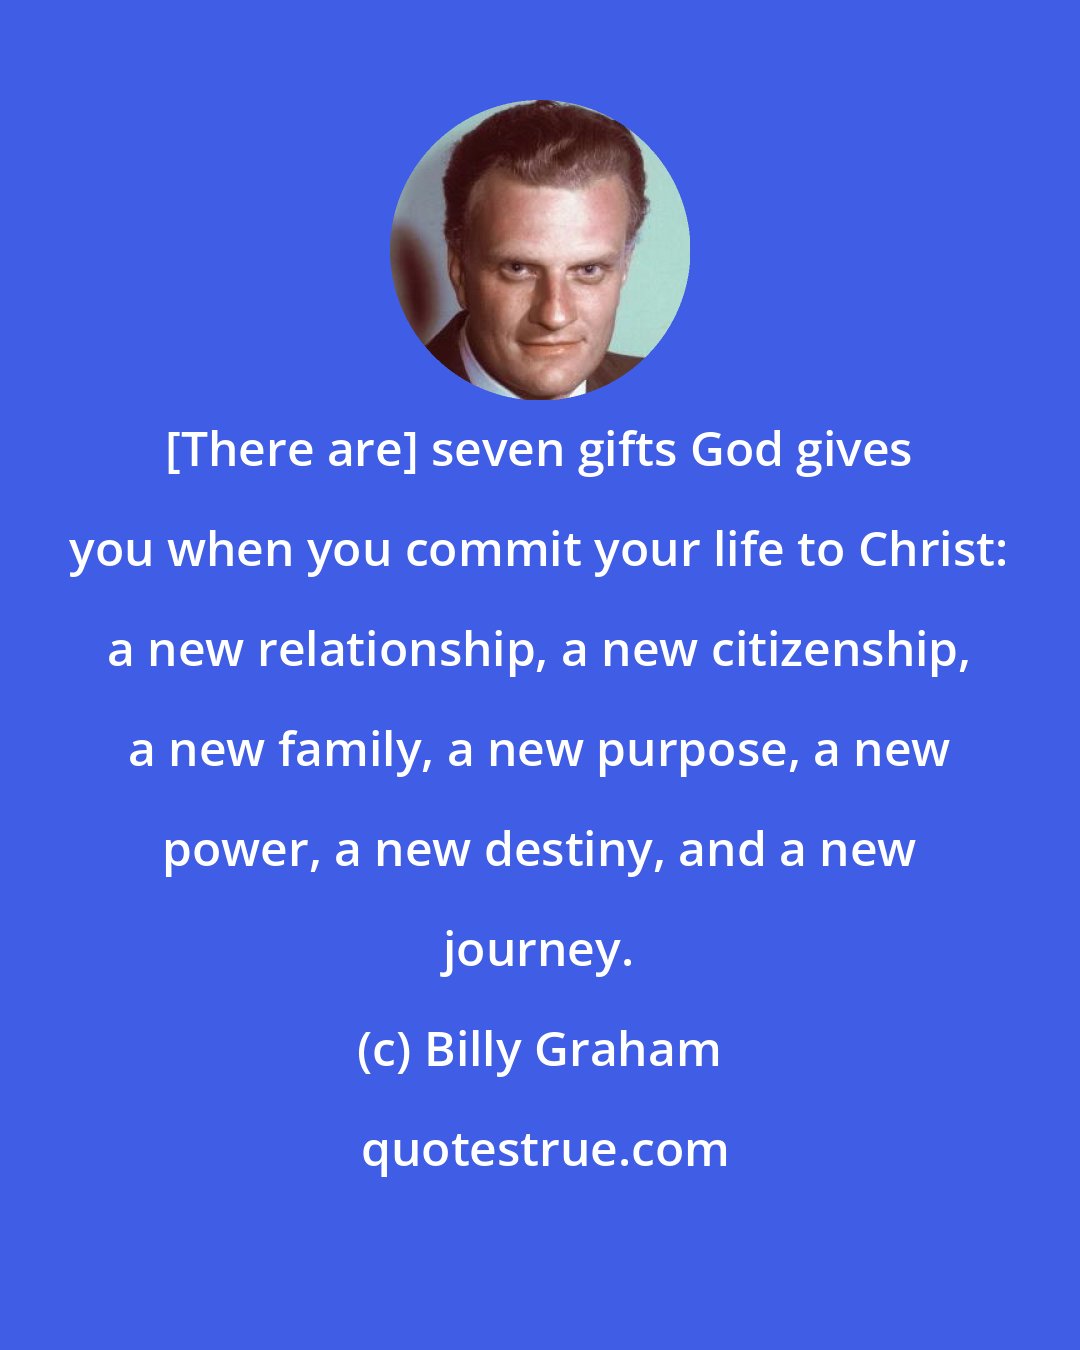 Billy Graham: [There are] seven gifts God gives you when you commit your life to Christ: a new relationship, a new citizenship, a new family, a new purpose, a new power, a new destiny, and a new journey.